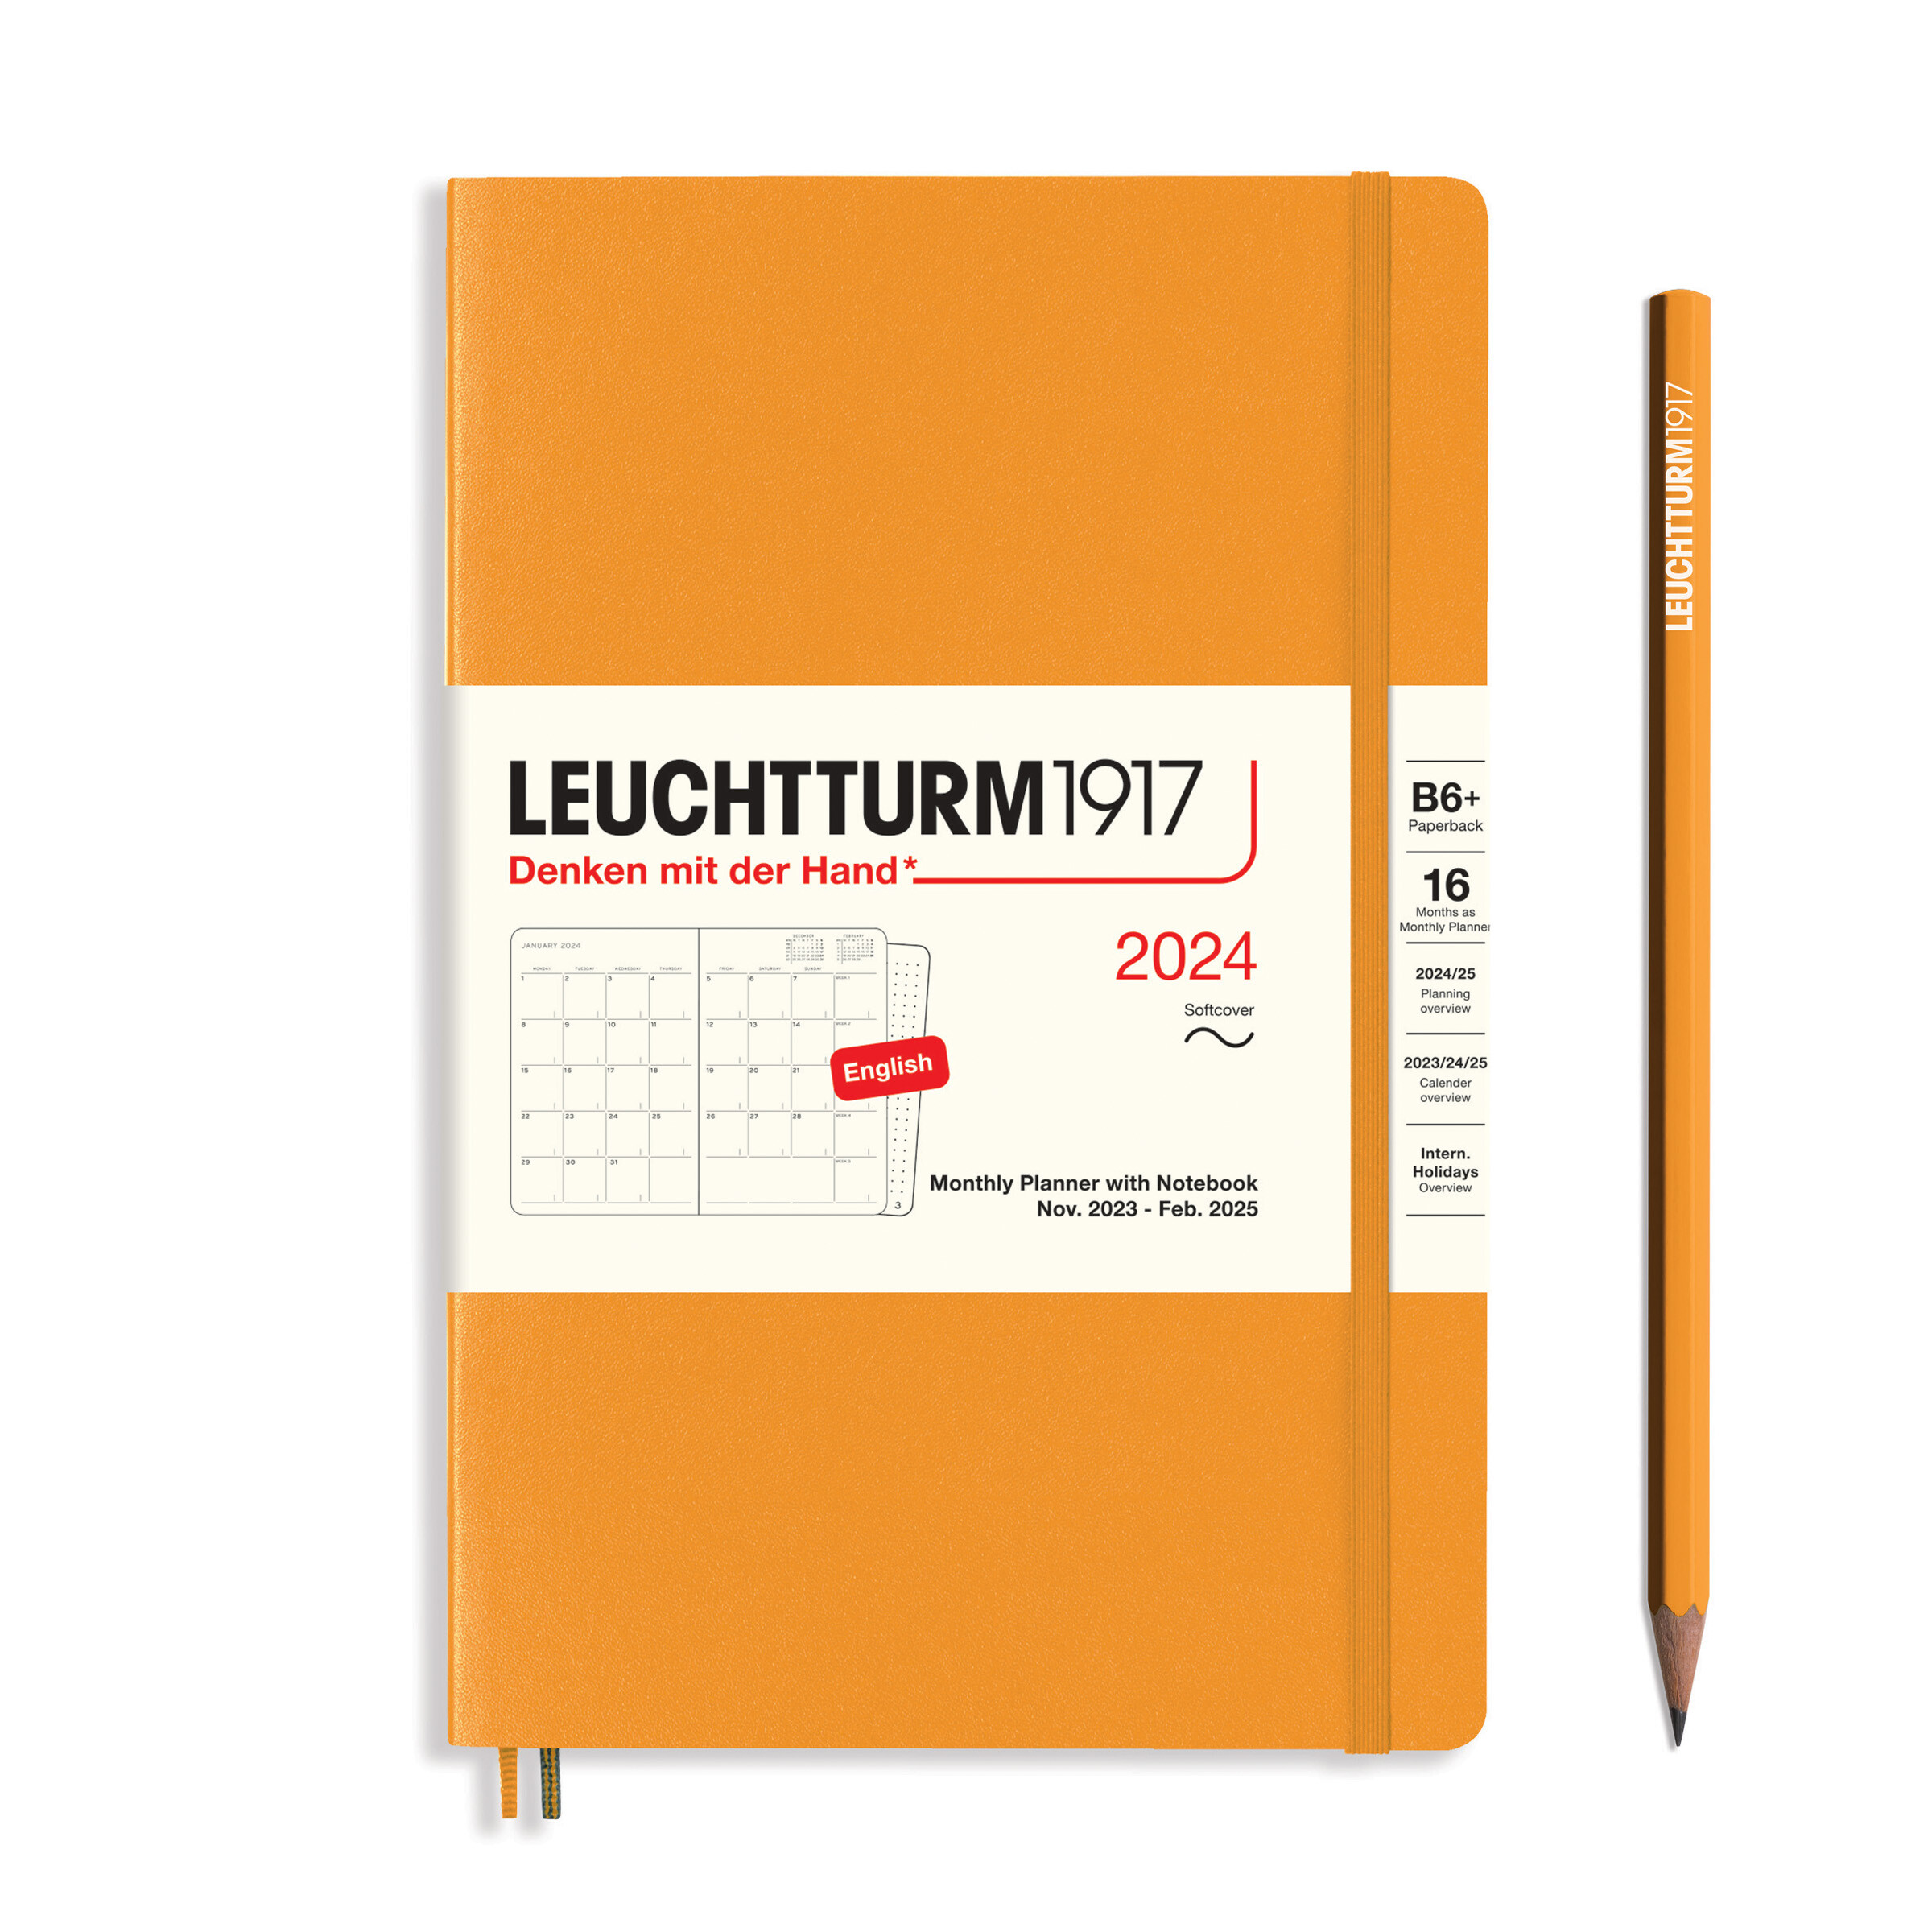 Monthly Planner & Notebook Paperback (B6+) 2024